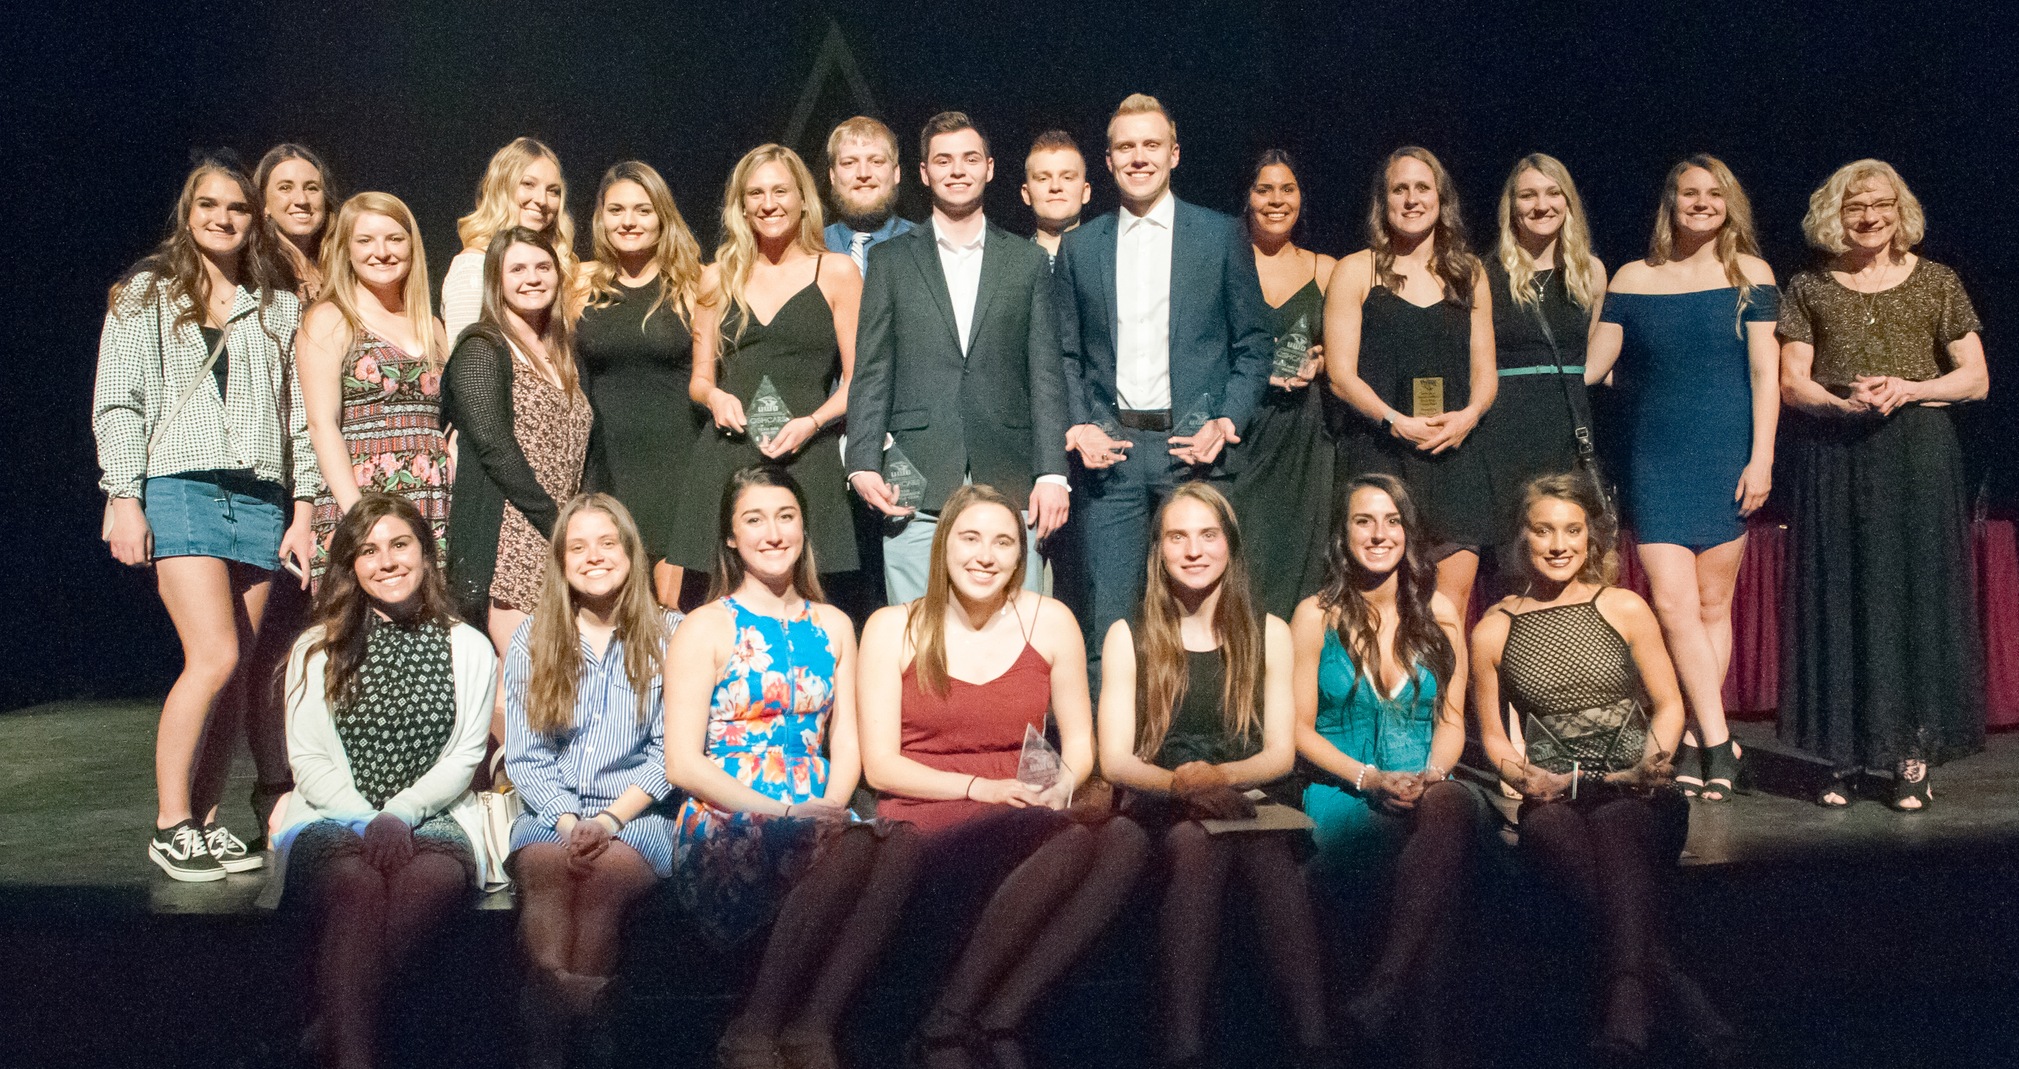 Student-Athletes Honored At Oshcars Awards Show